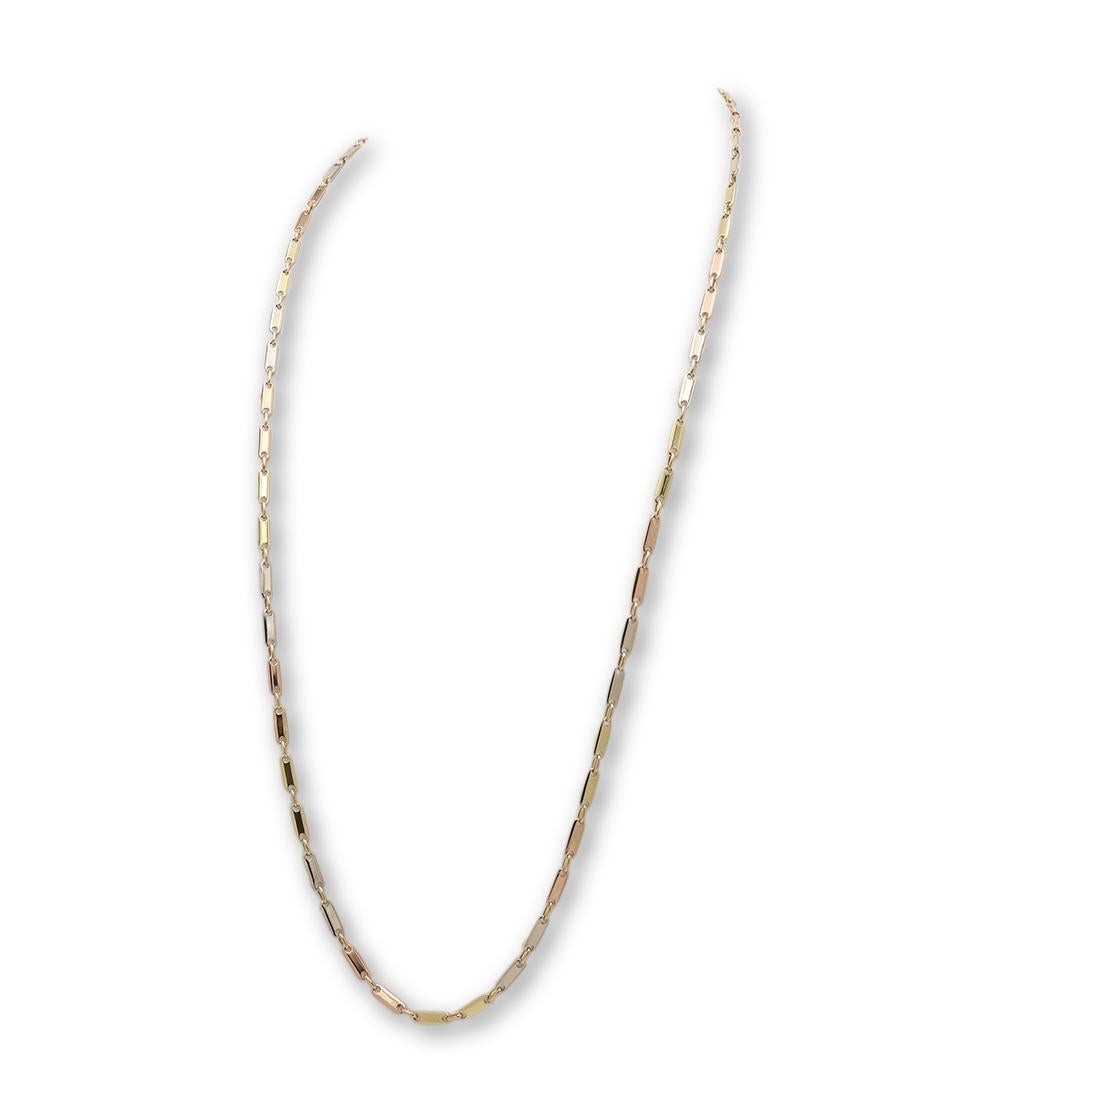 Sophisticated link necklace crafted in 18 karat rose, yellow, and white gold compromised of high polished flat links. The chain measures 2mm wide and 33.5 inches in length. Signed 750, no hallmarks or maker's marks present. Necklace is not presented